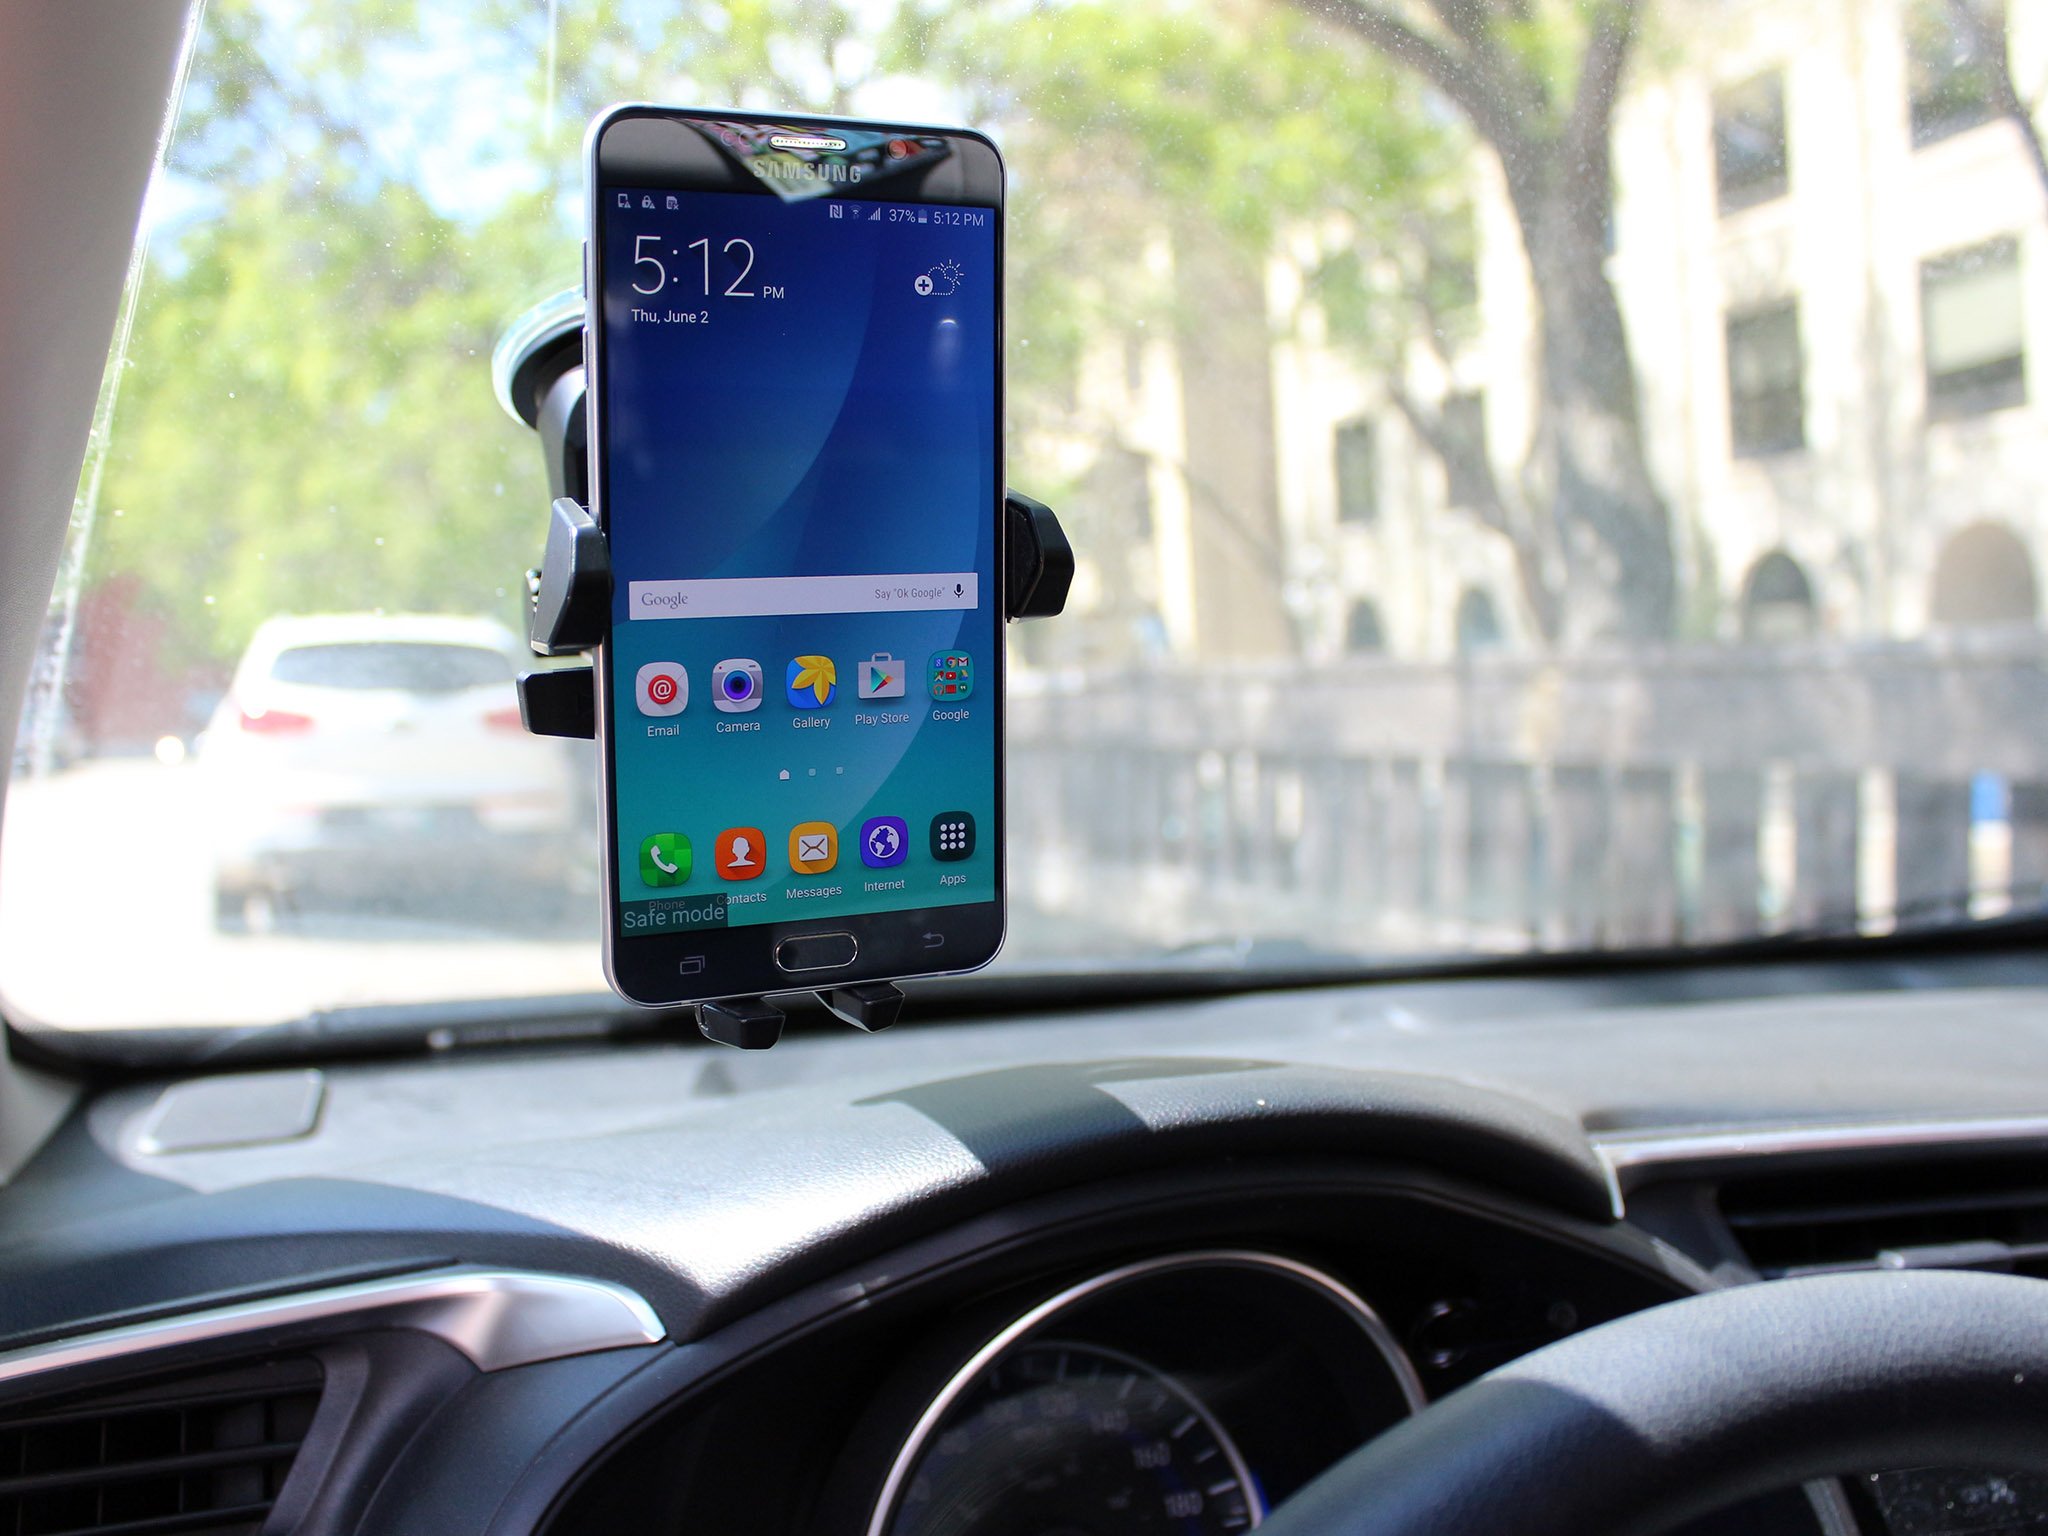 Turn your old smartphone into a dashboard camera